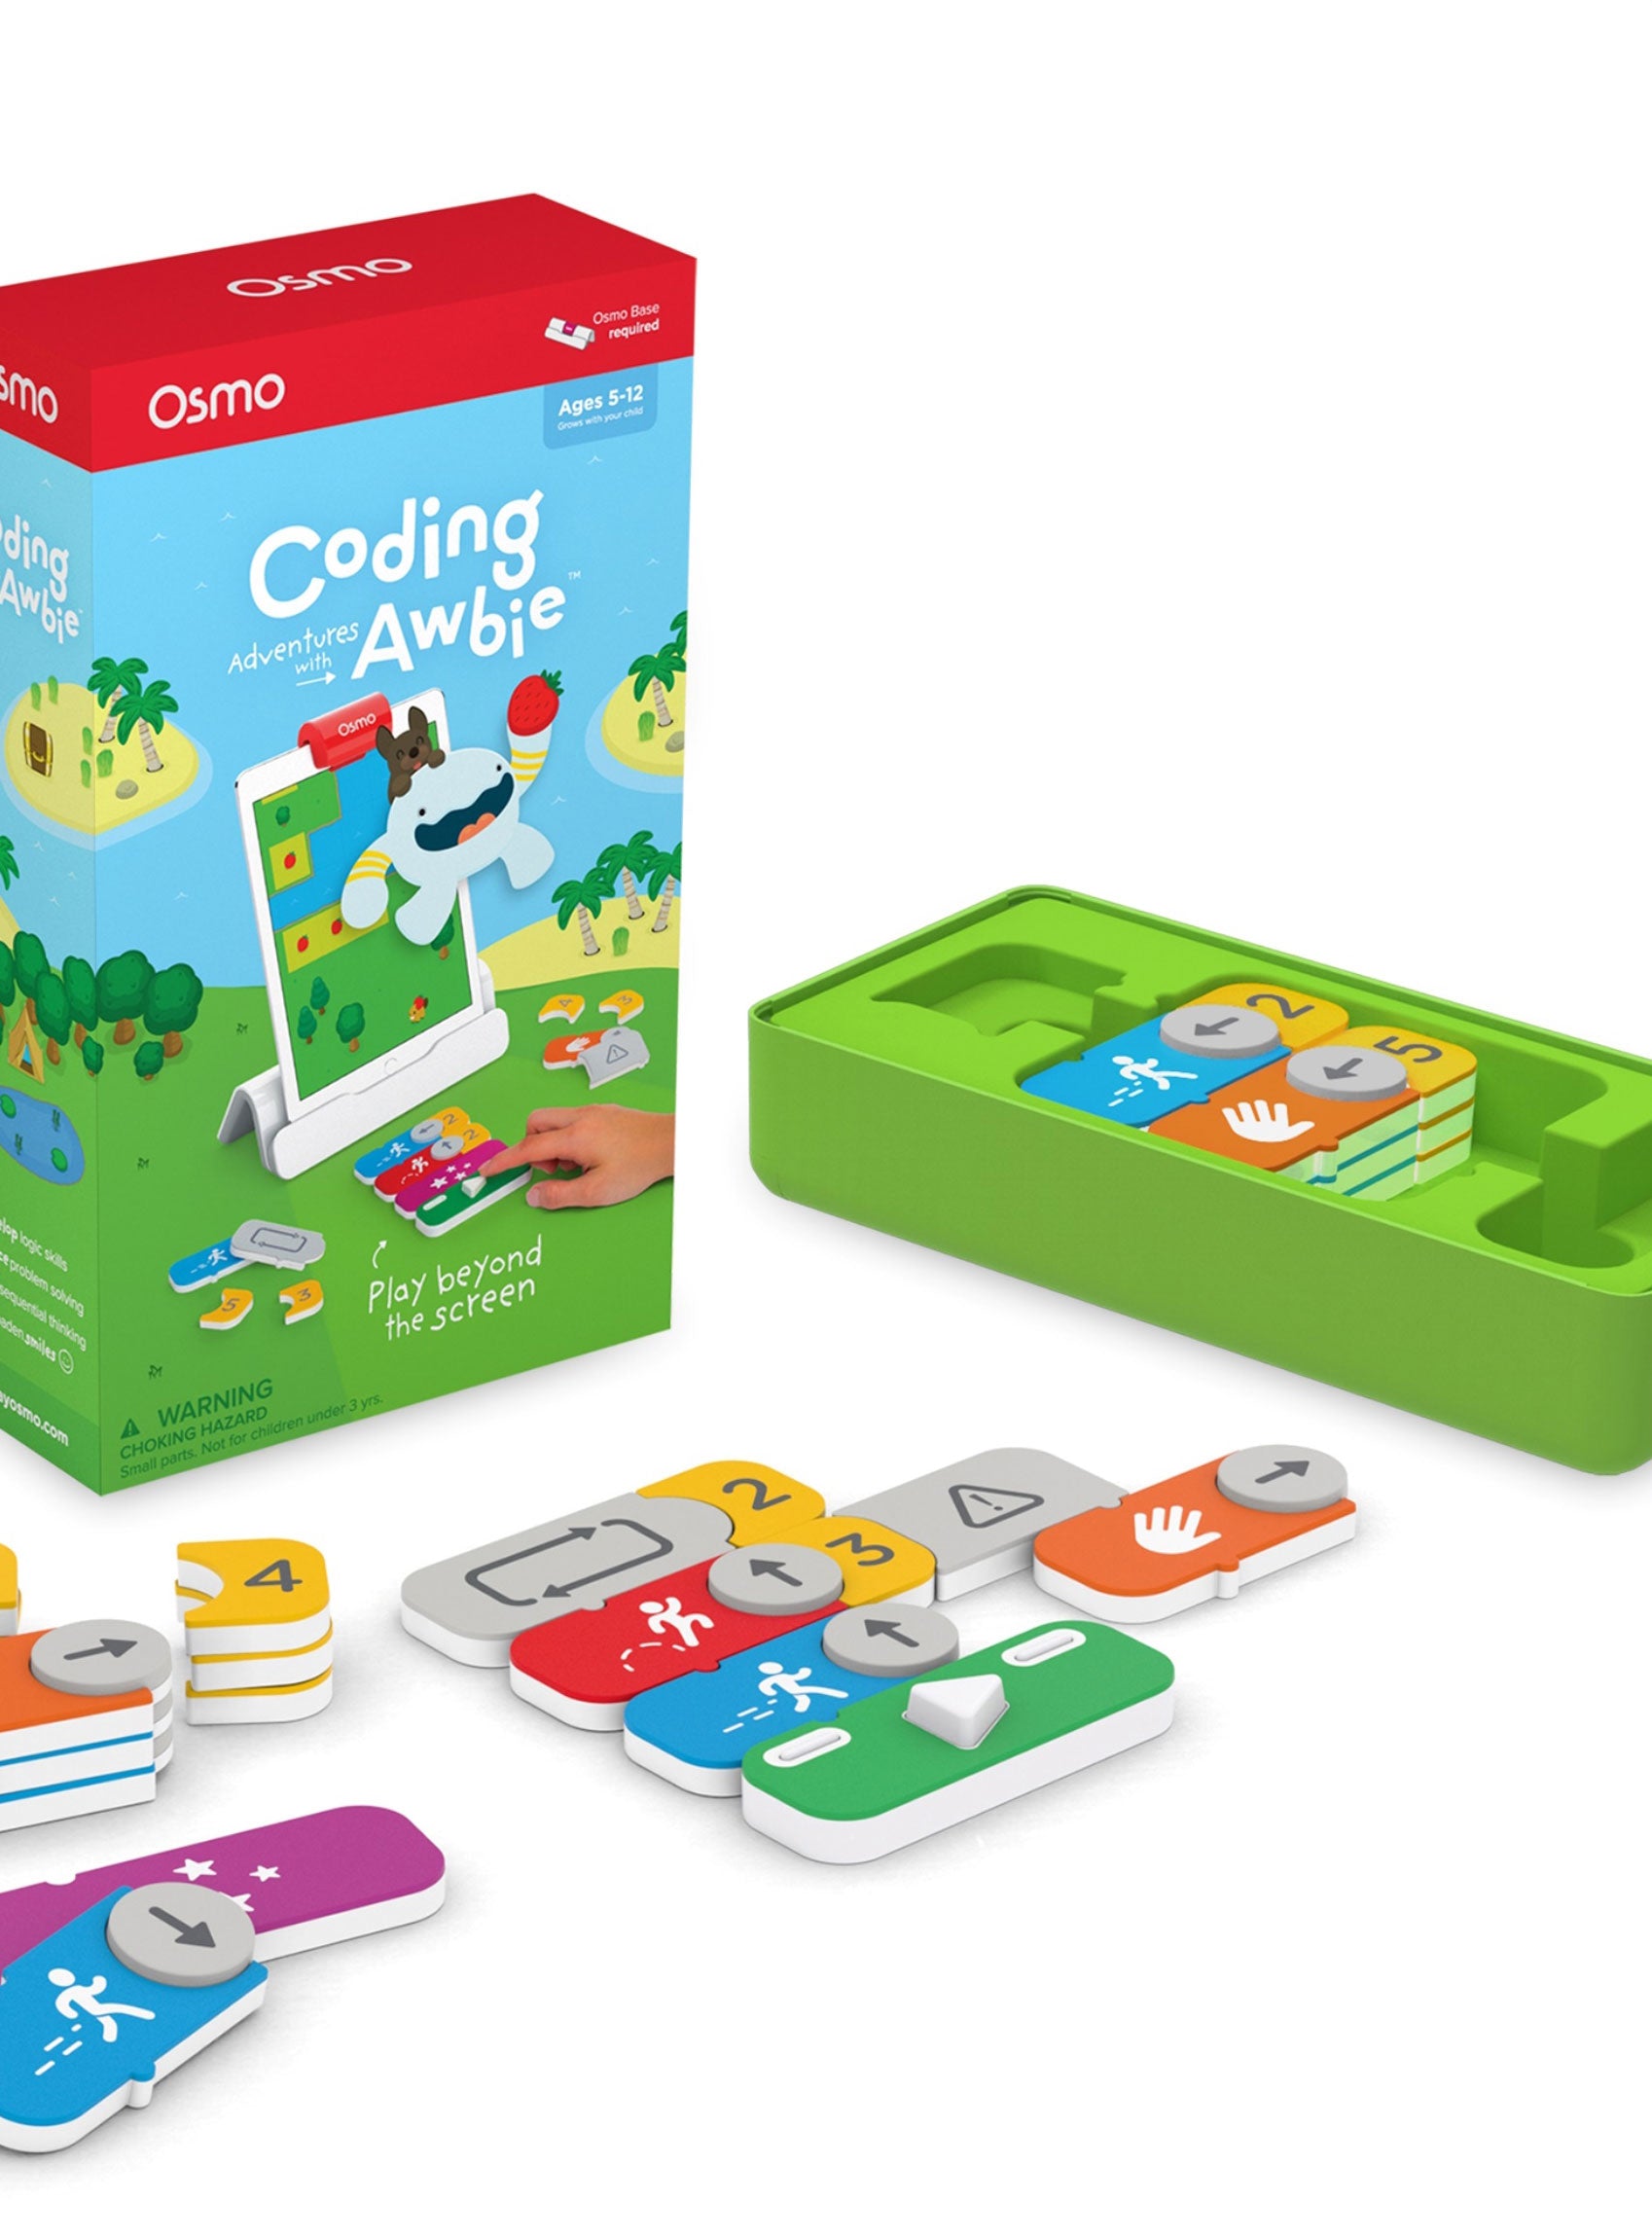 Osmo Coding Adventure with Awbie for Ages 5-12 (Base NOT Included) - Mac Addict